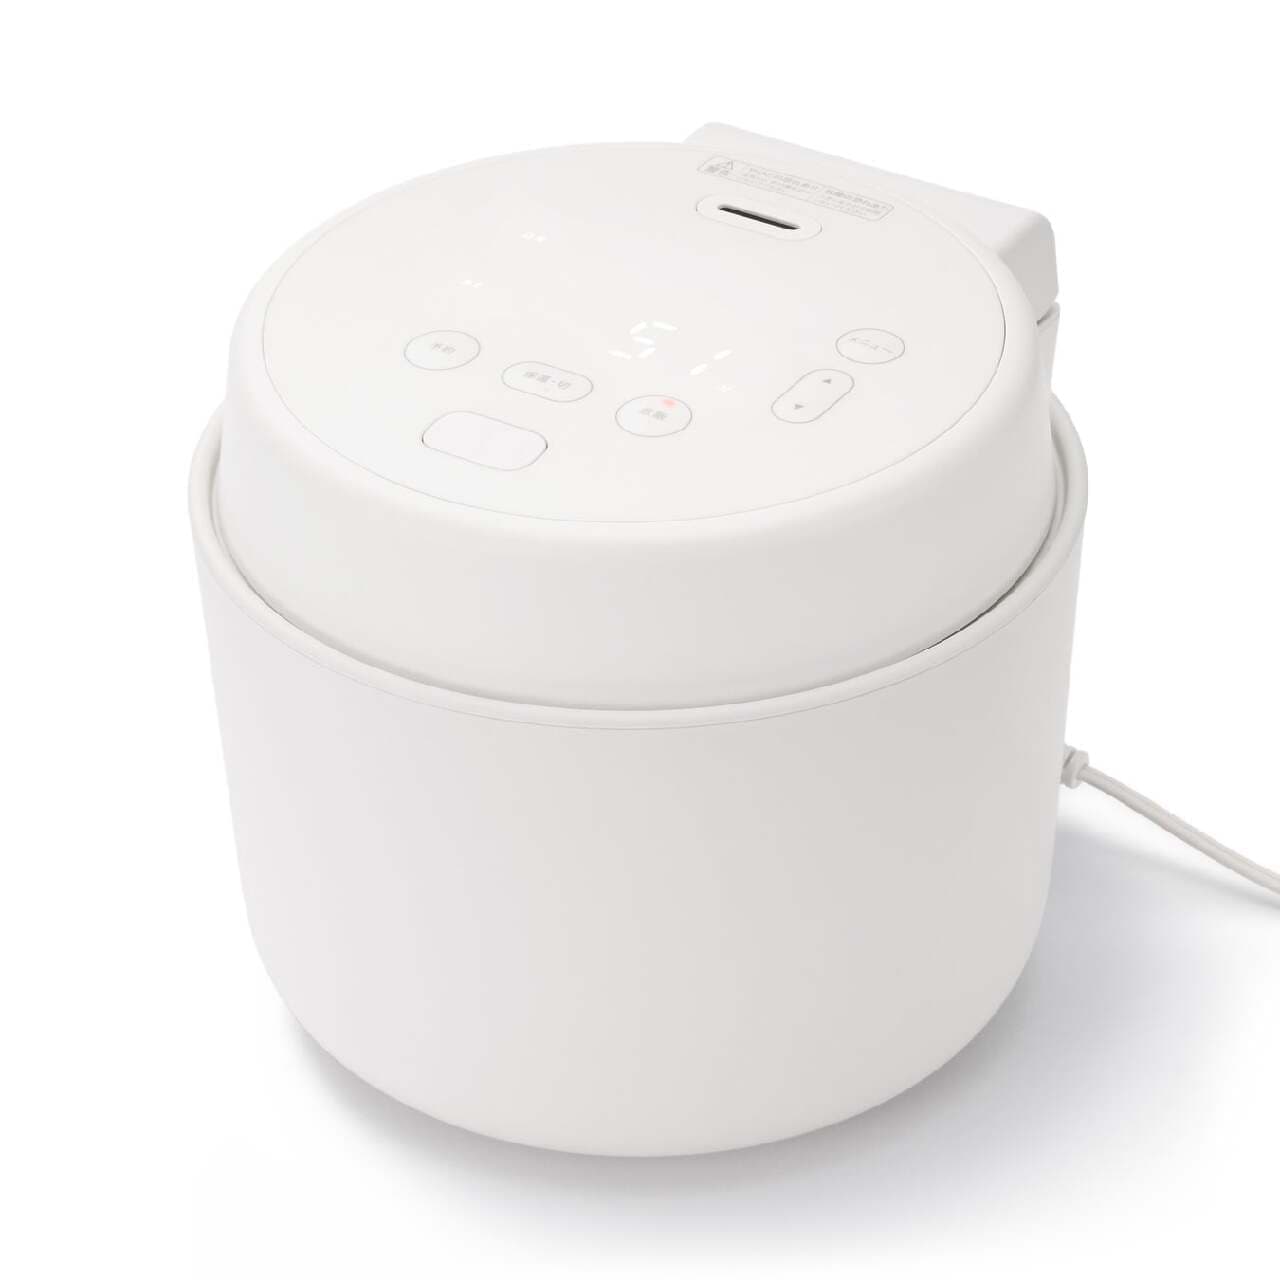 ``5.5 cup rice cooker with cooking function'' is now available from MUJI! Multi-directional heating makes rice delicious, and it also comes with 10 different cooking functions, and will be on sale from February 29th Image 1